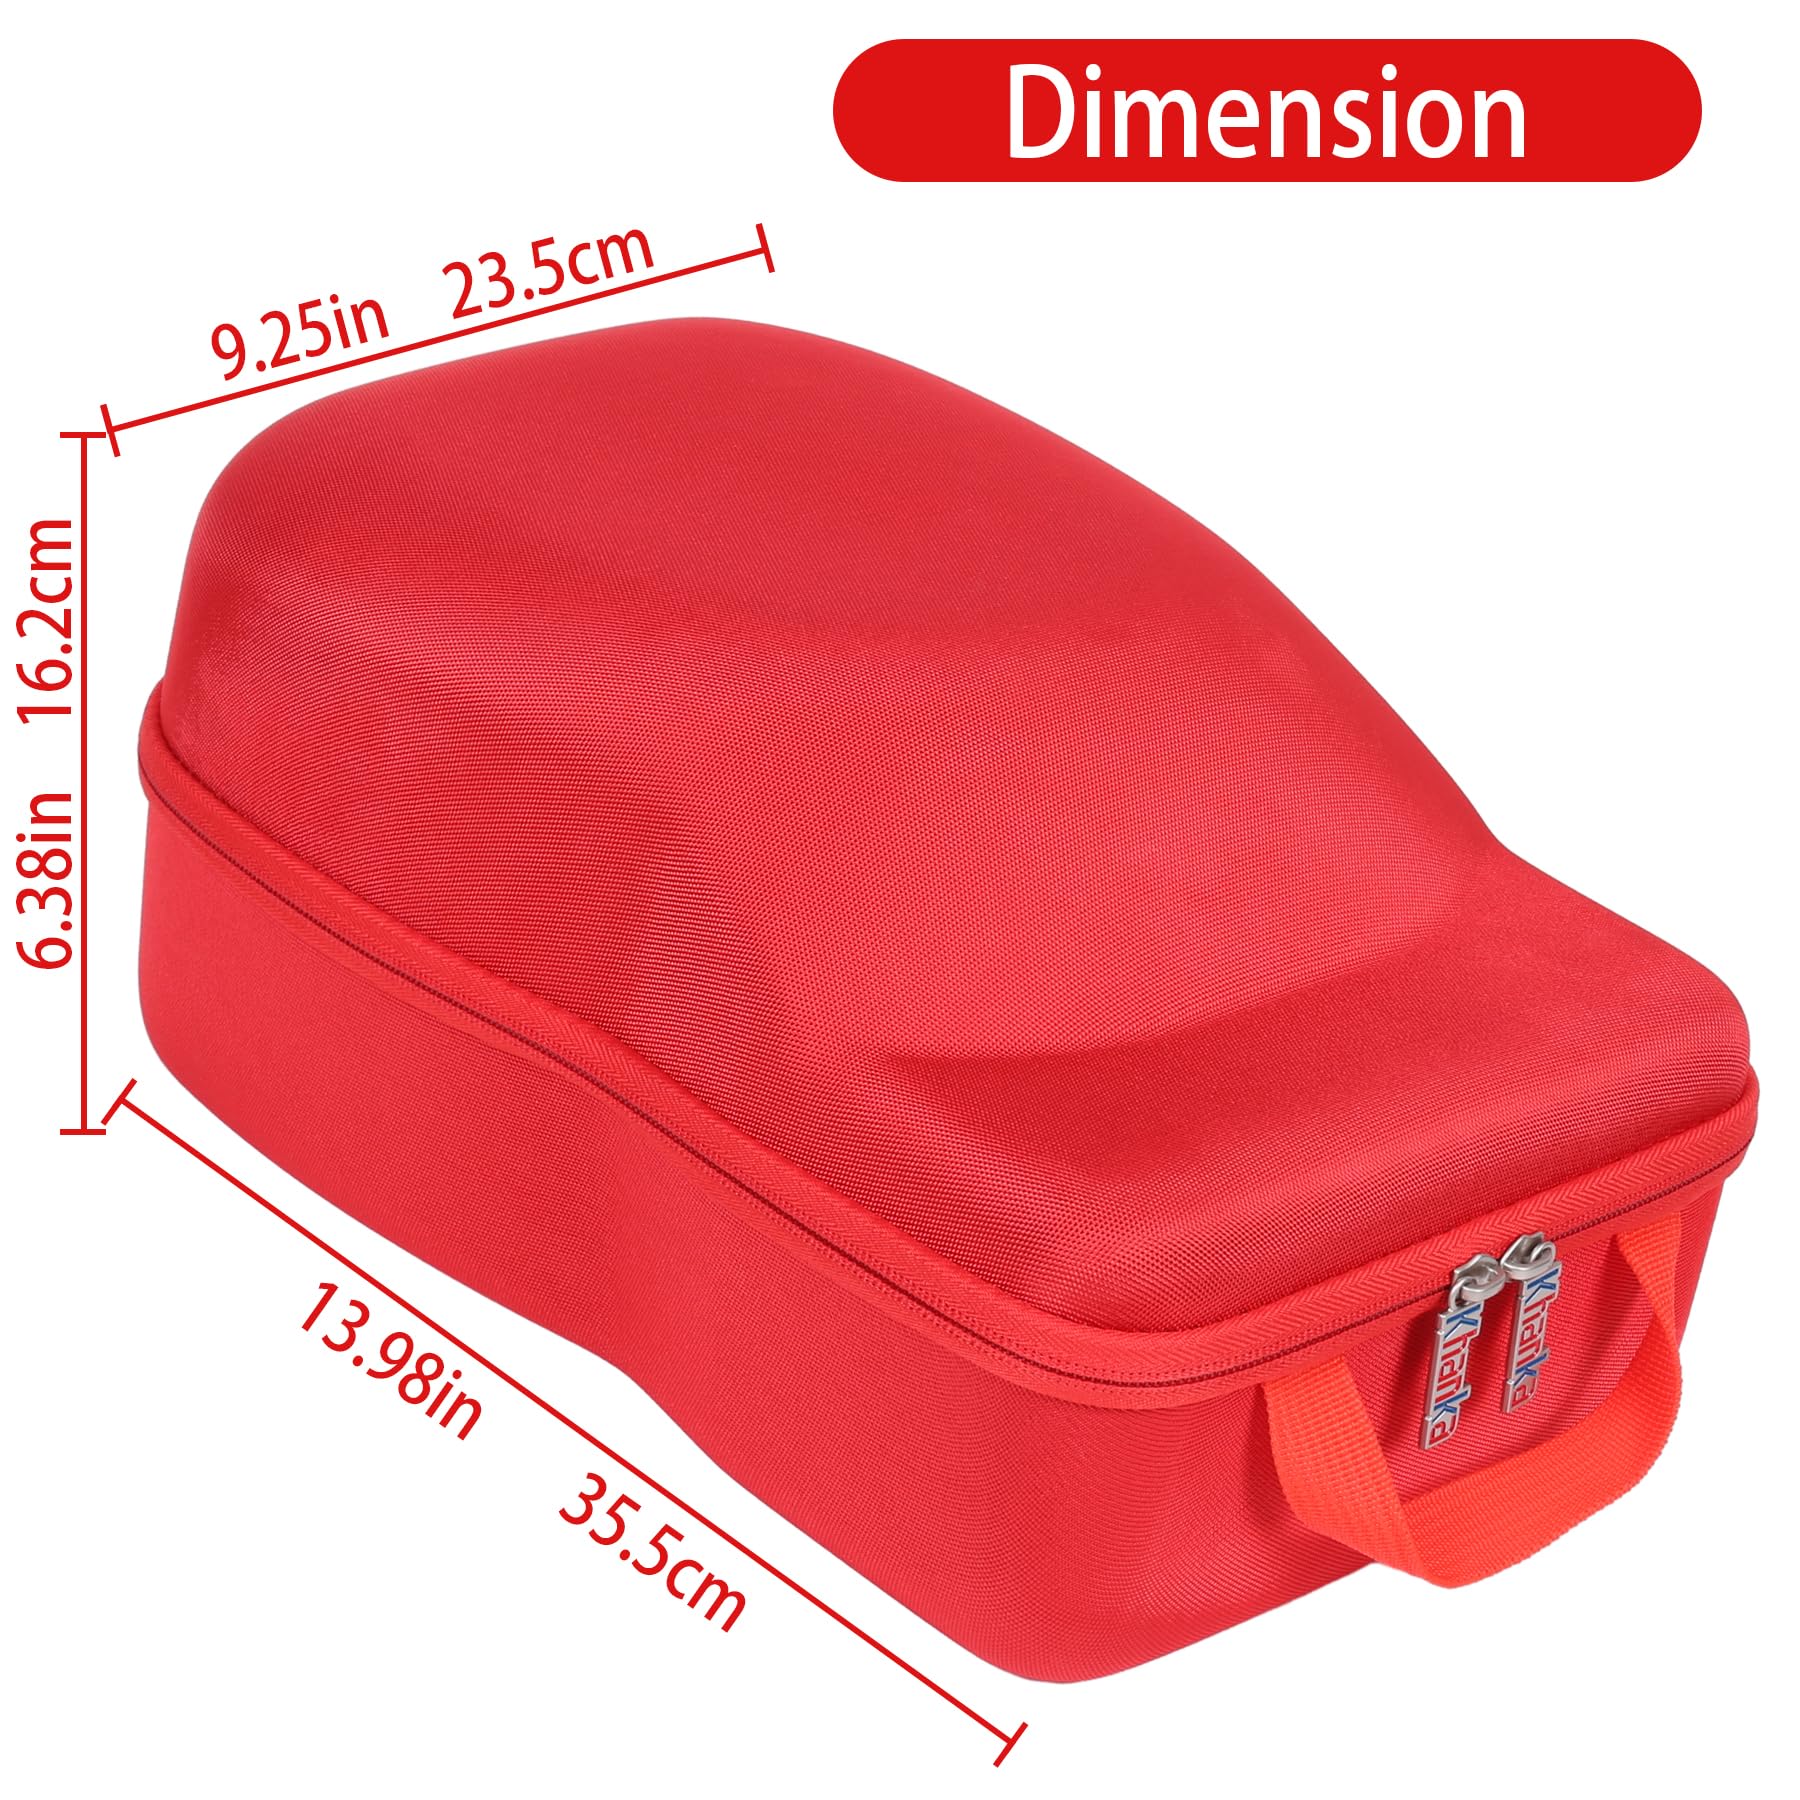 khanka Hard Storage Carrying Case Compatible with Baseball Caps This Organizer Holder Protects up to 8 Hats (Red)